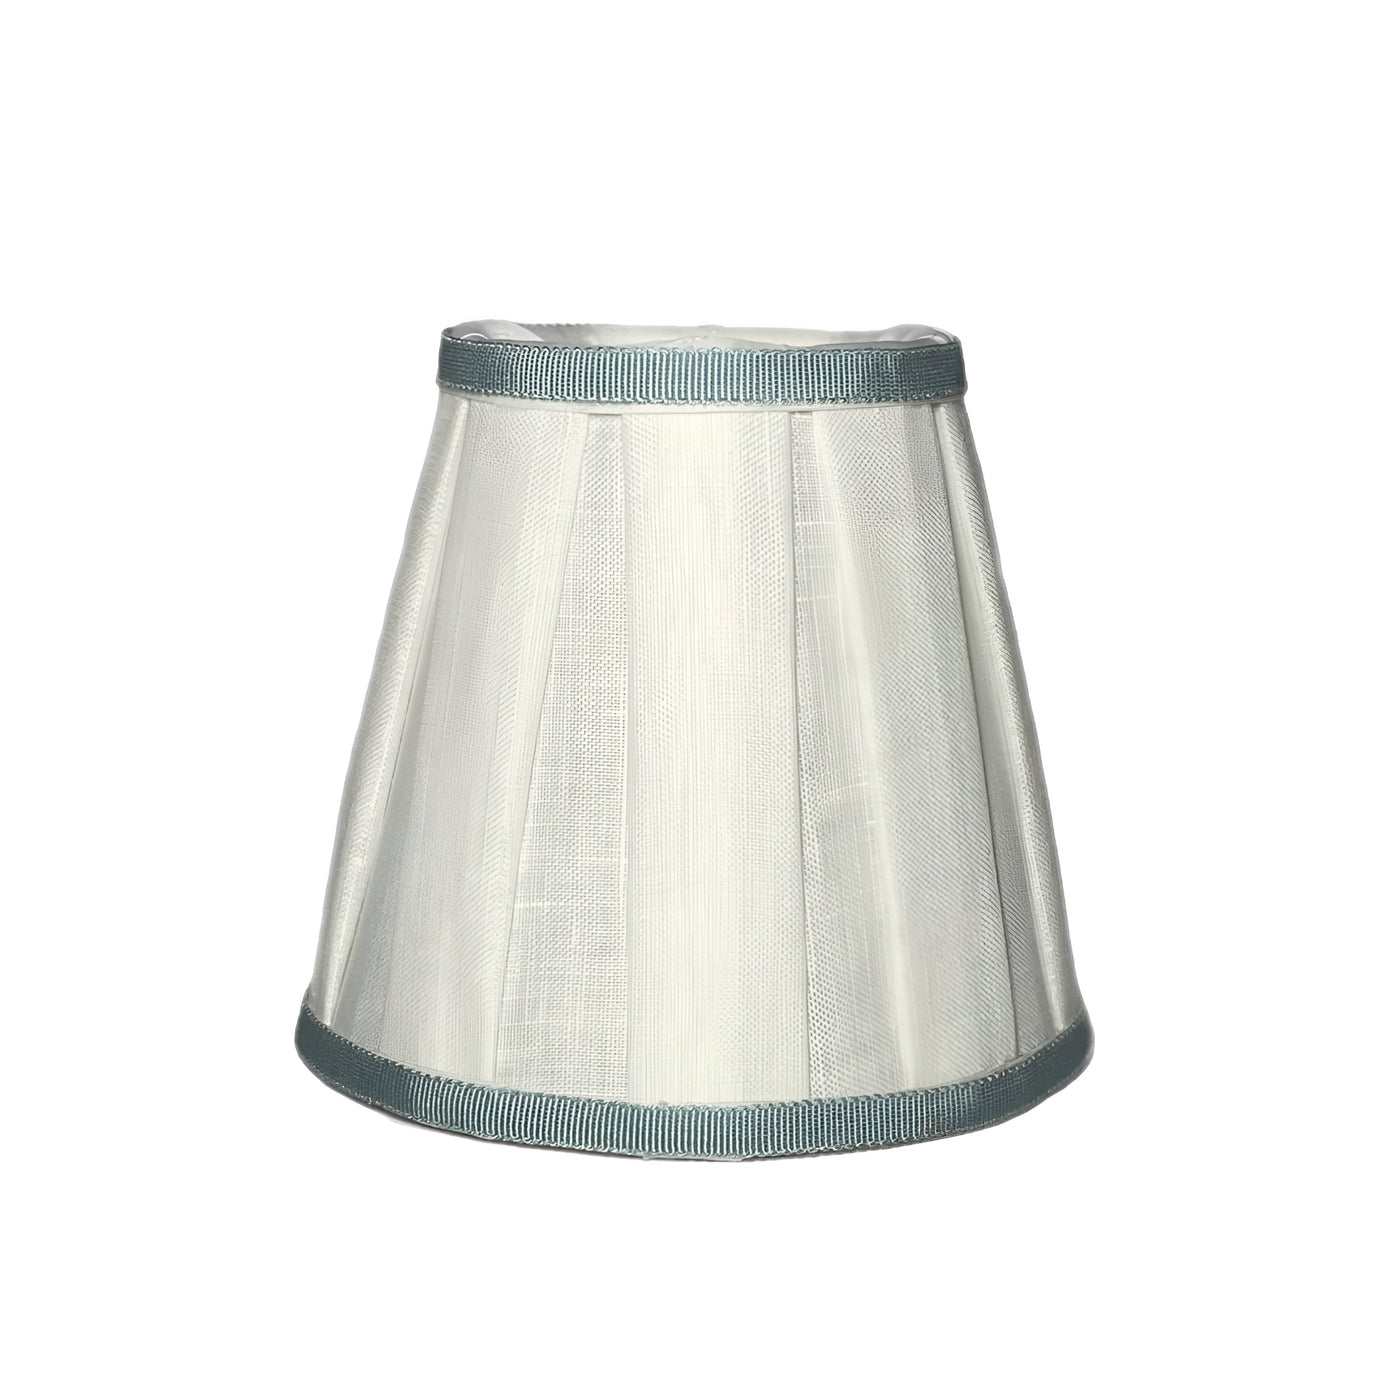 Linen box pleat chandelier shade with blue ribbon trim